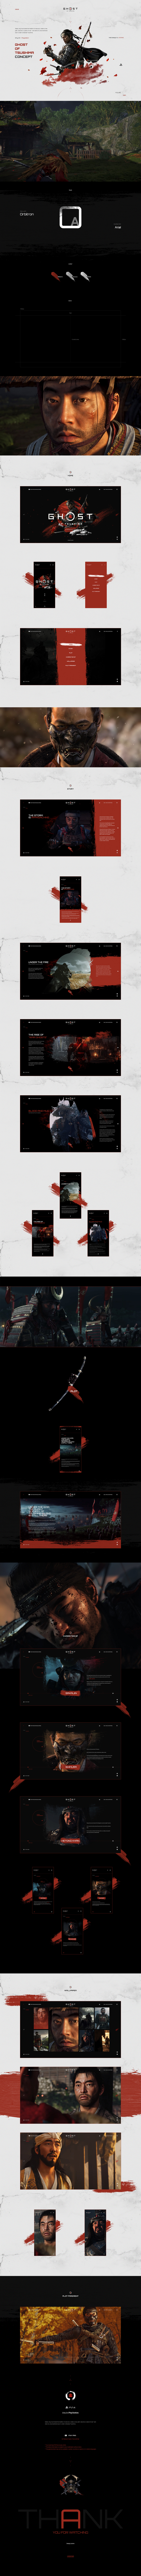 cool game ghost of tsushima graphic design  Ps4 UI user experience Web